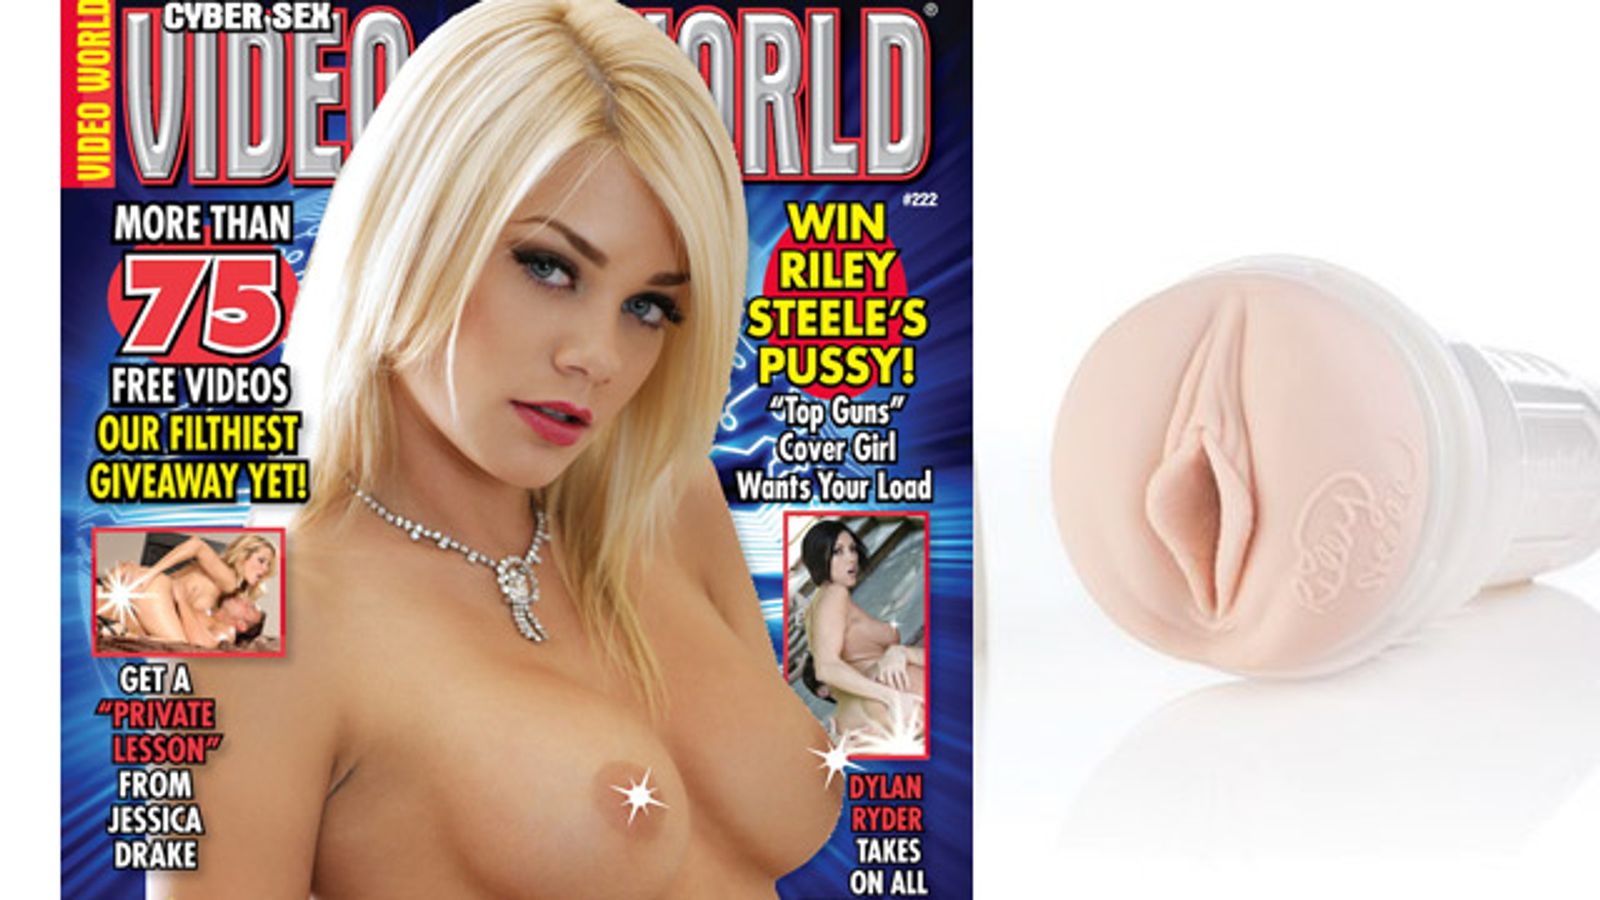 Riley Steele Makes An Offer You Can’t Refuse on ‘Video World’ Cover